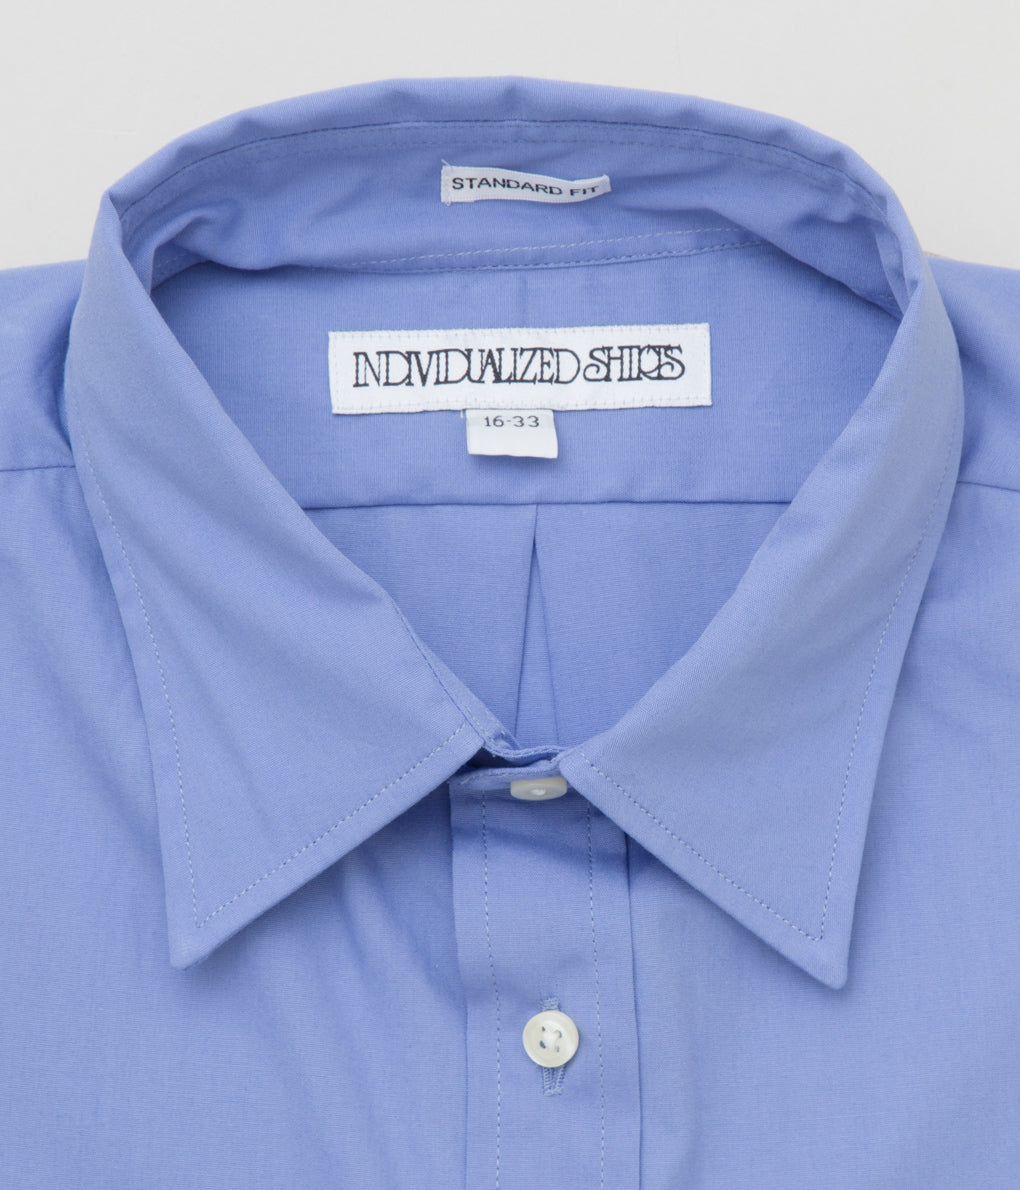 INDIVIDUALIZED SHIRTS "POPLIN (STANDARD FIT TRADITIONAL COLLAR SHIRT)"(FRENCH BLUE)